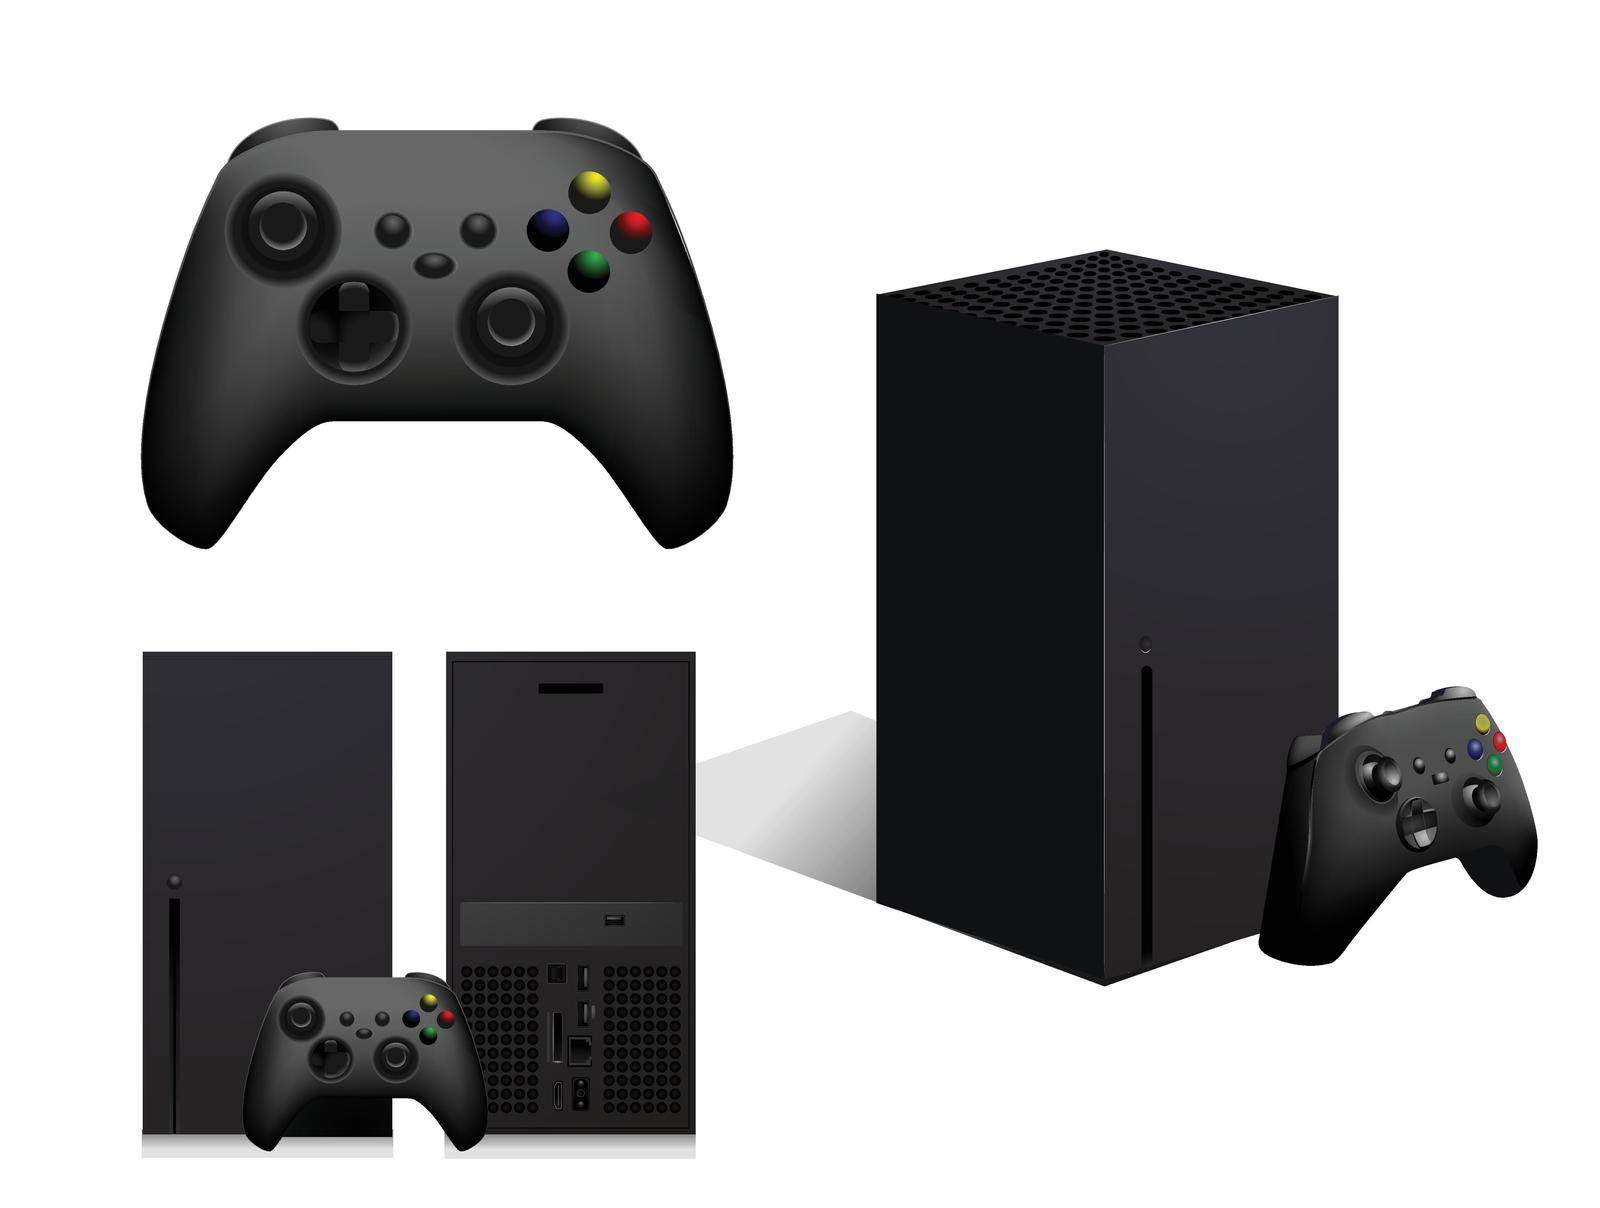 console game element variety vector play next gen controller draft entertain xbsx xbox x box